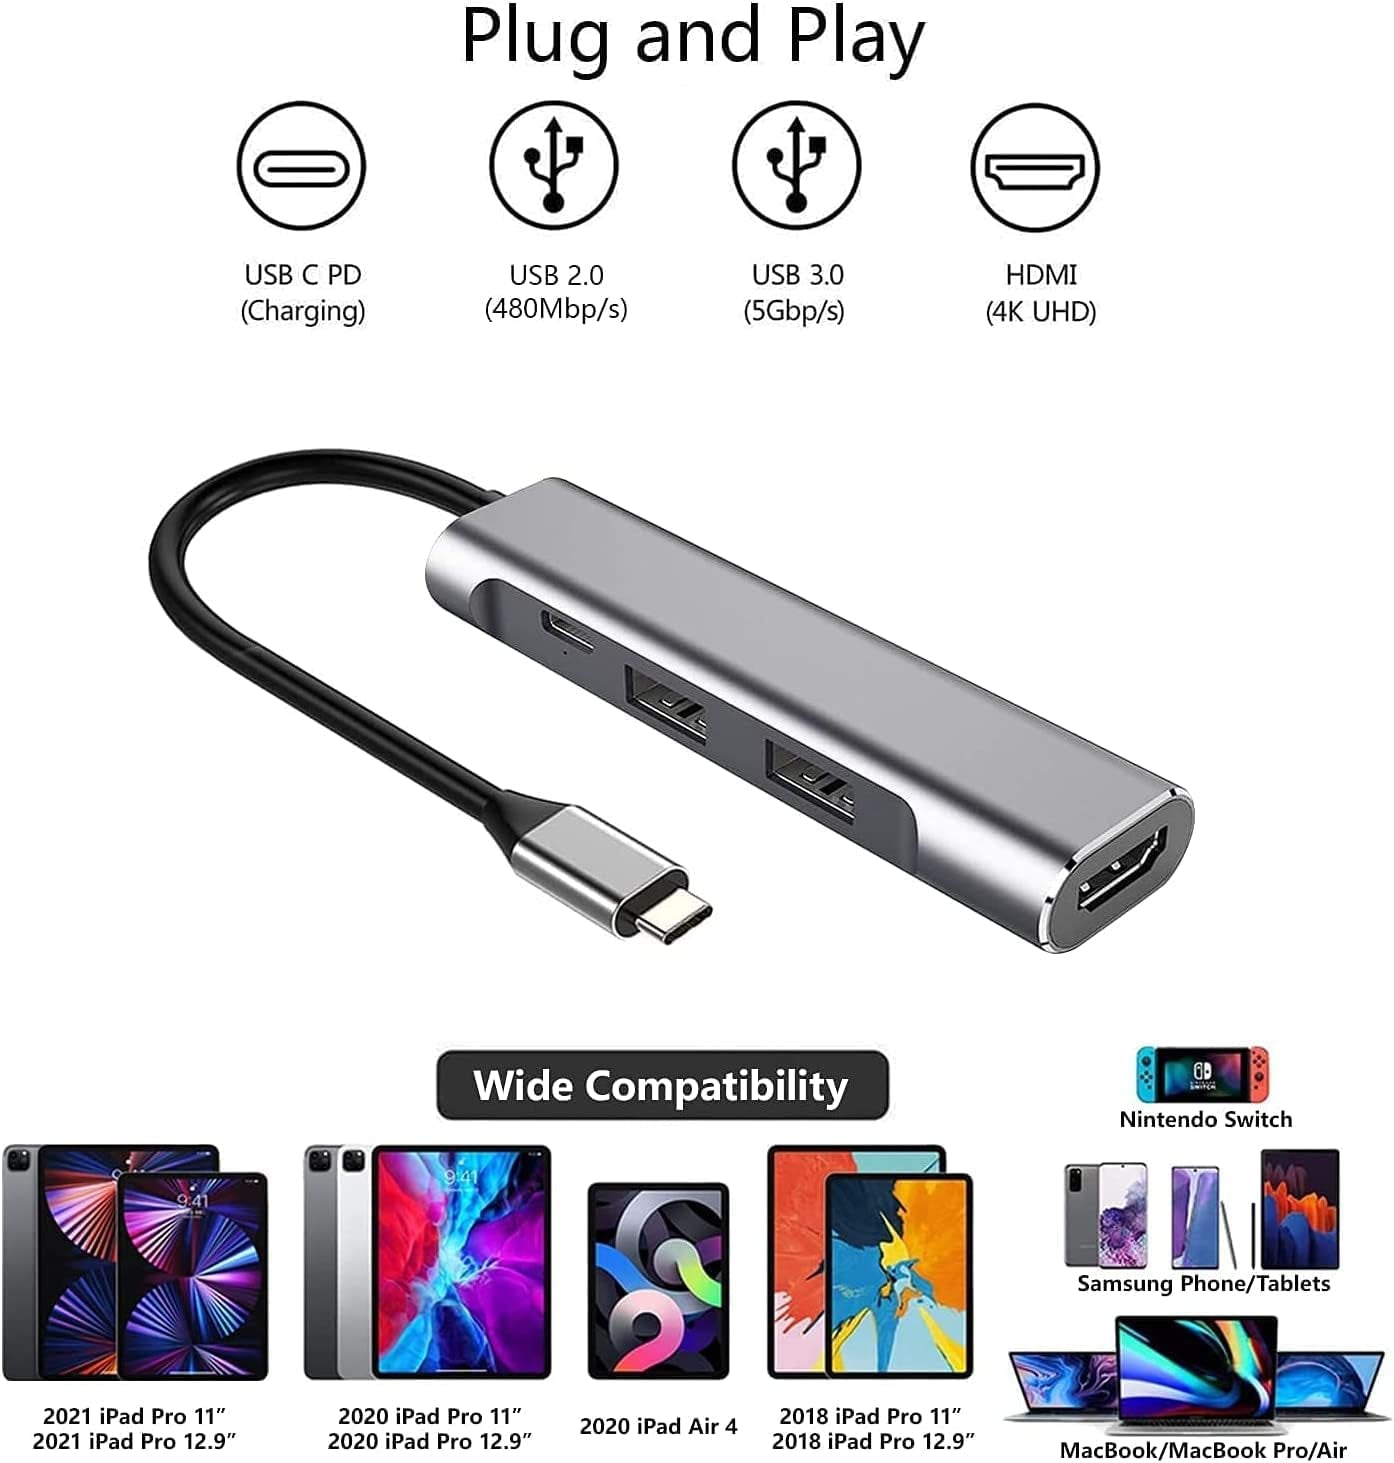 USB Type C to HDMI Digital AV Multiport Hub with PD Charger, USB-C (USB3.1) Adapter for OLED Switch/Nintendo Switch, Portable 4K HDMI Dock for Samsung Dex Station